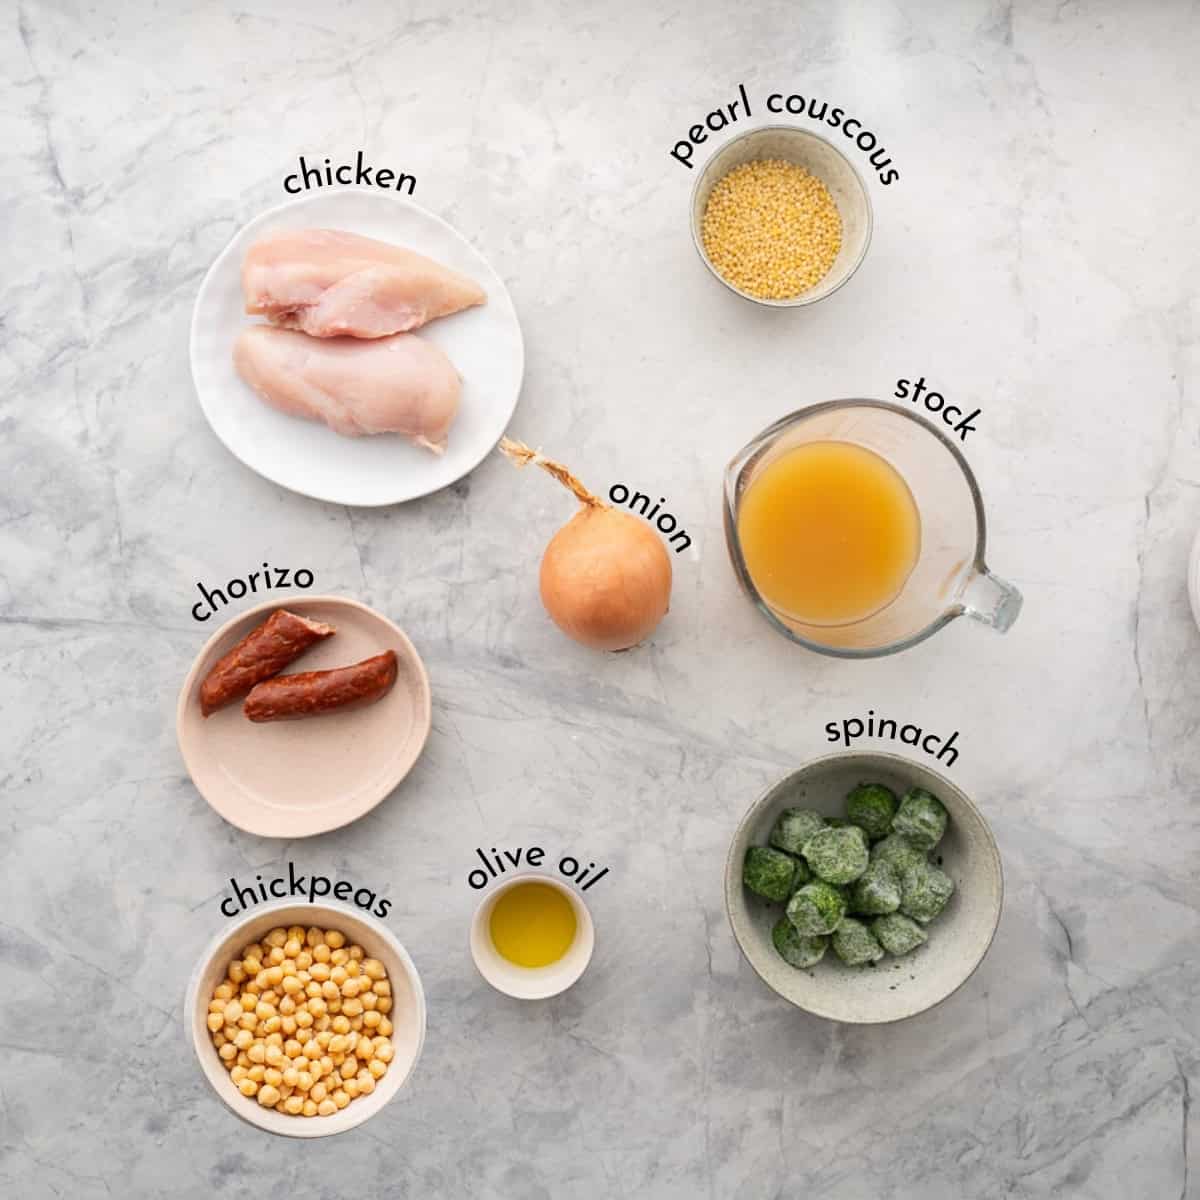 All the ingredients to make the Chicken Couscous, laid out on the bench